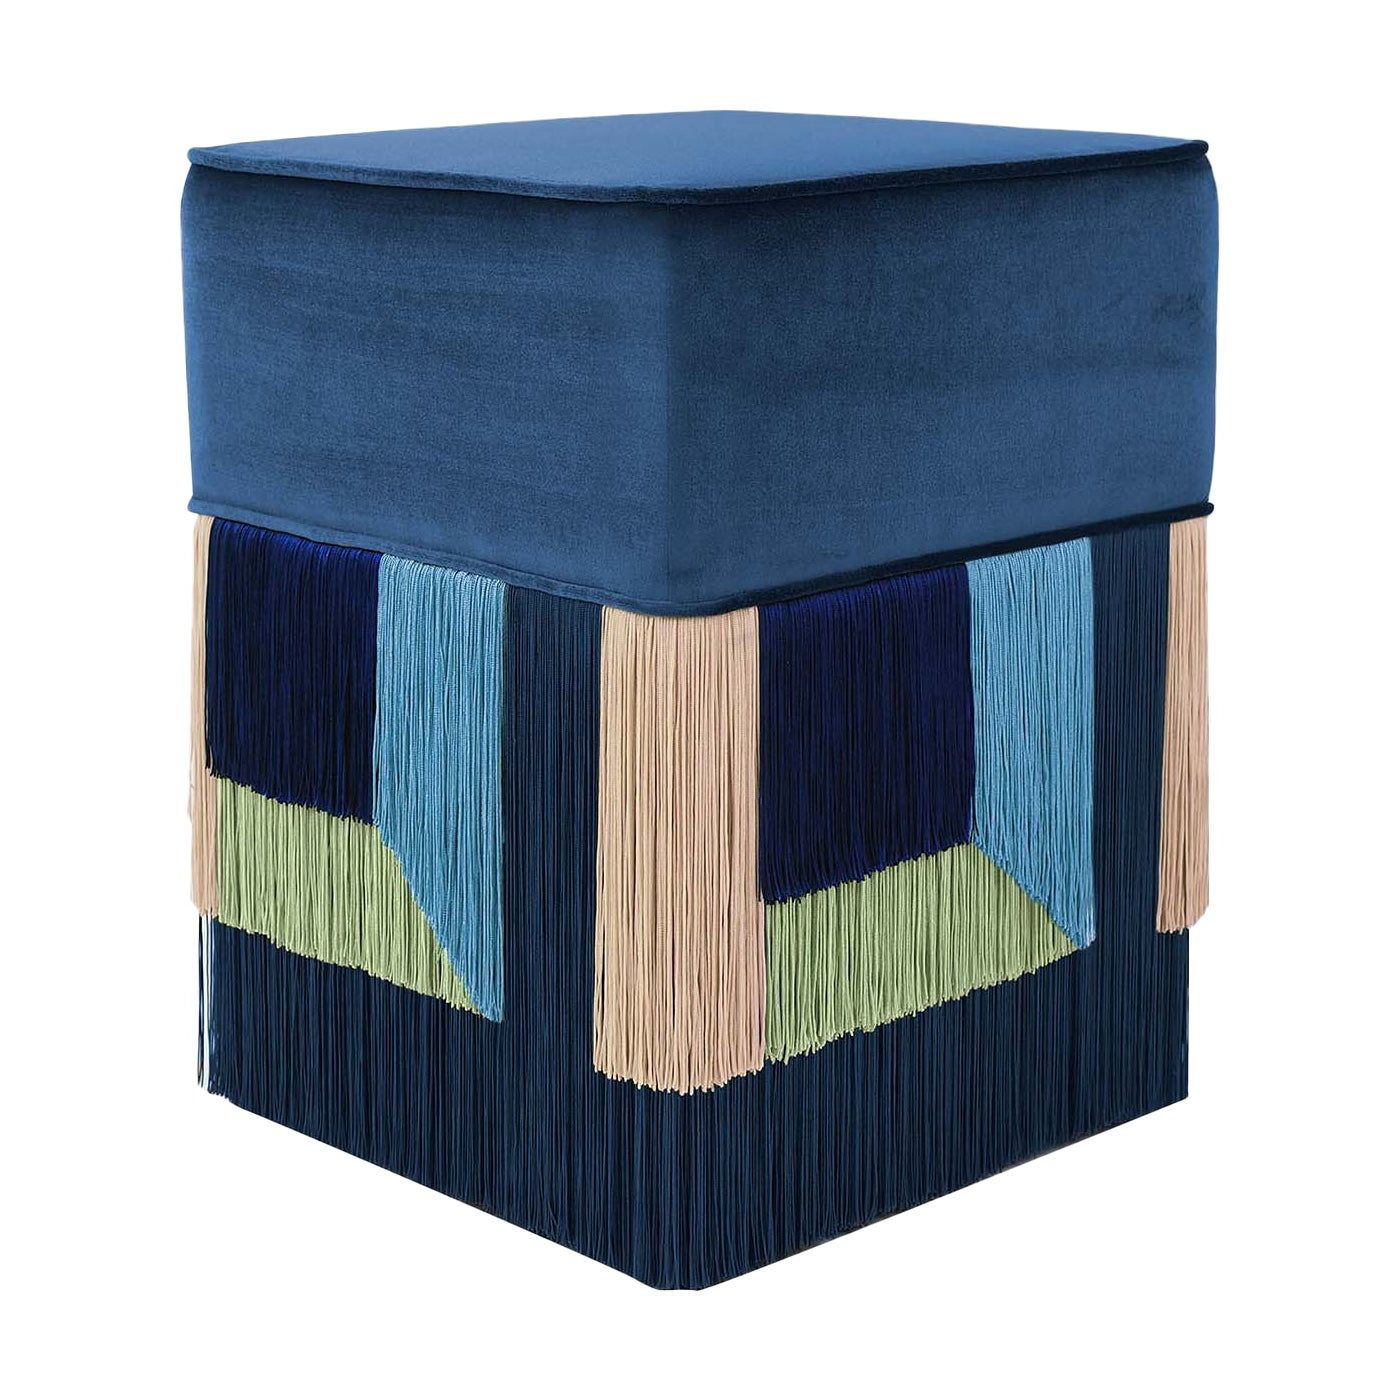 2020 Couture Geometric Giò Purple Ottoman For Sale At 1stdibs Throughout Brushed Geometric Pattern Ottomans (View 1 of 10)